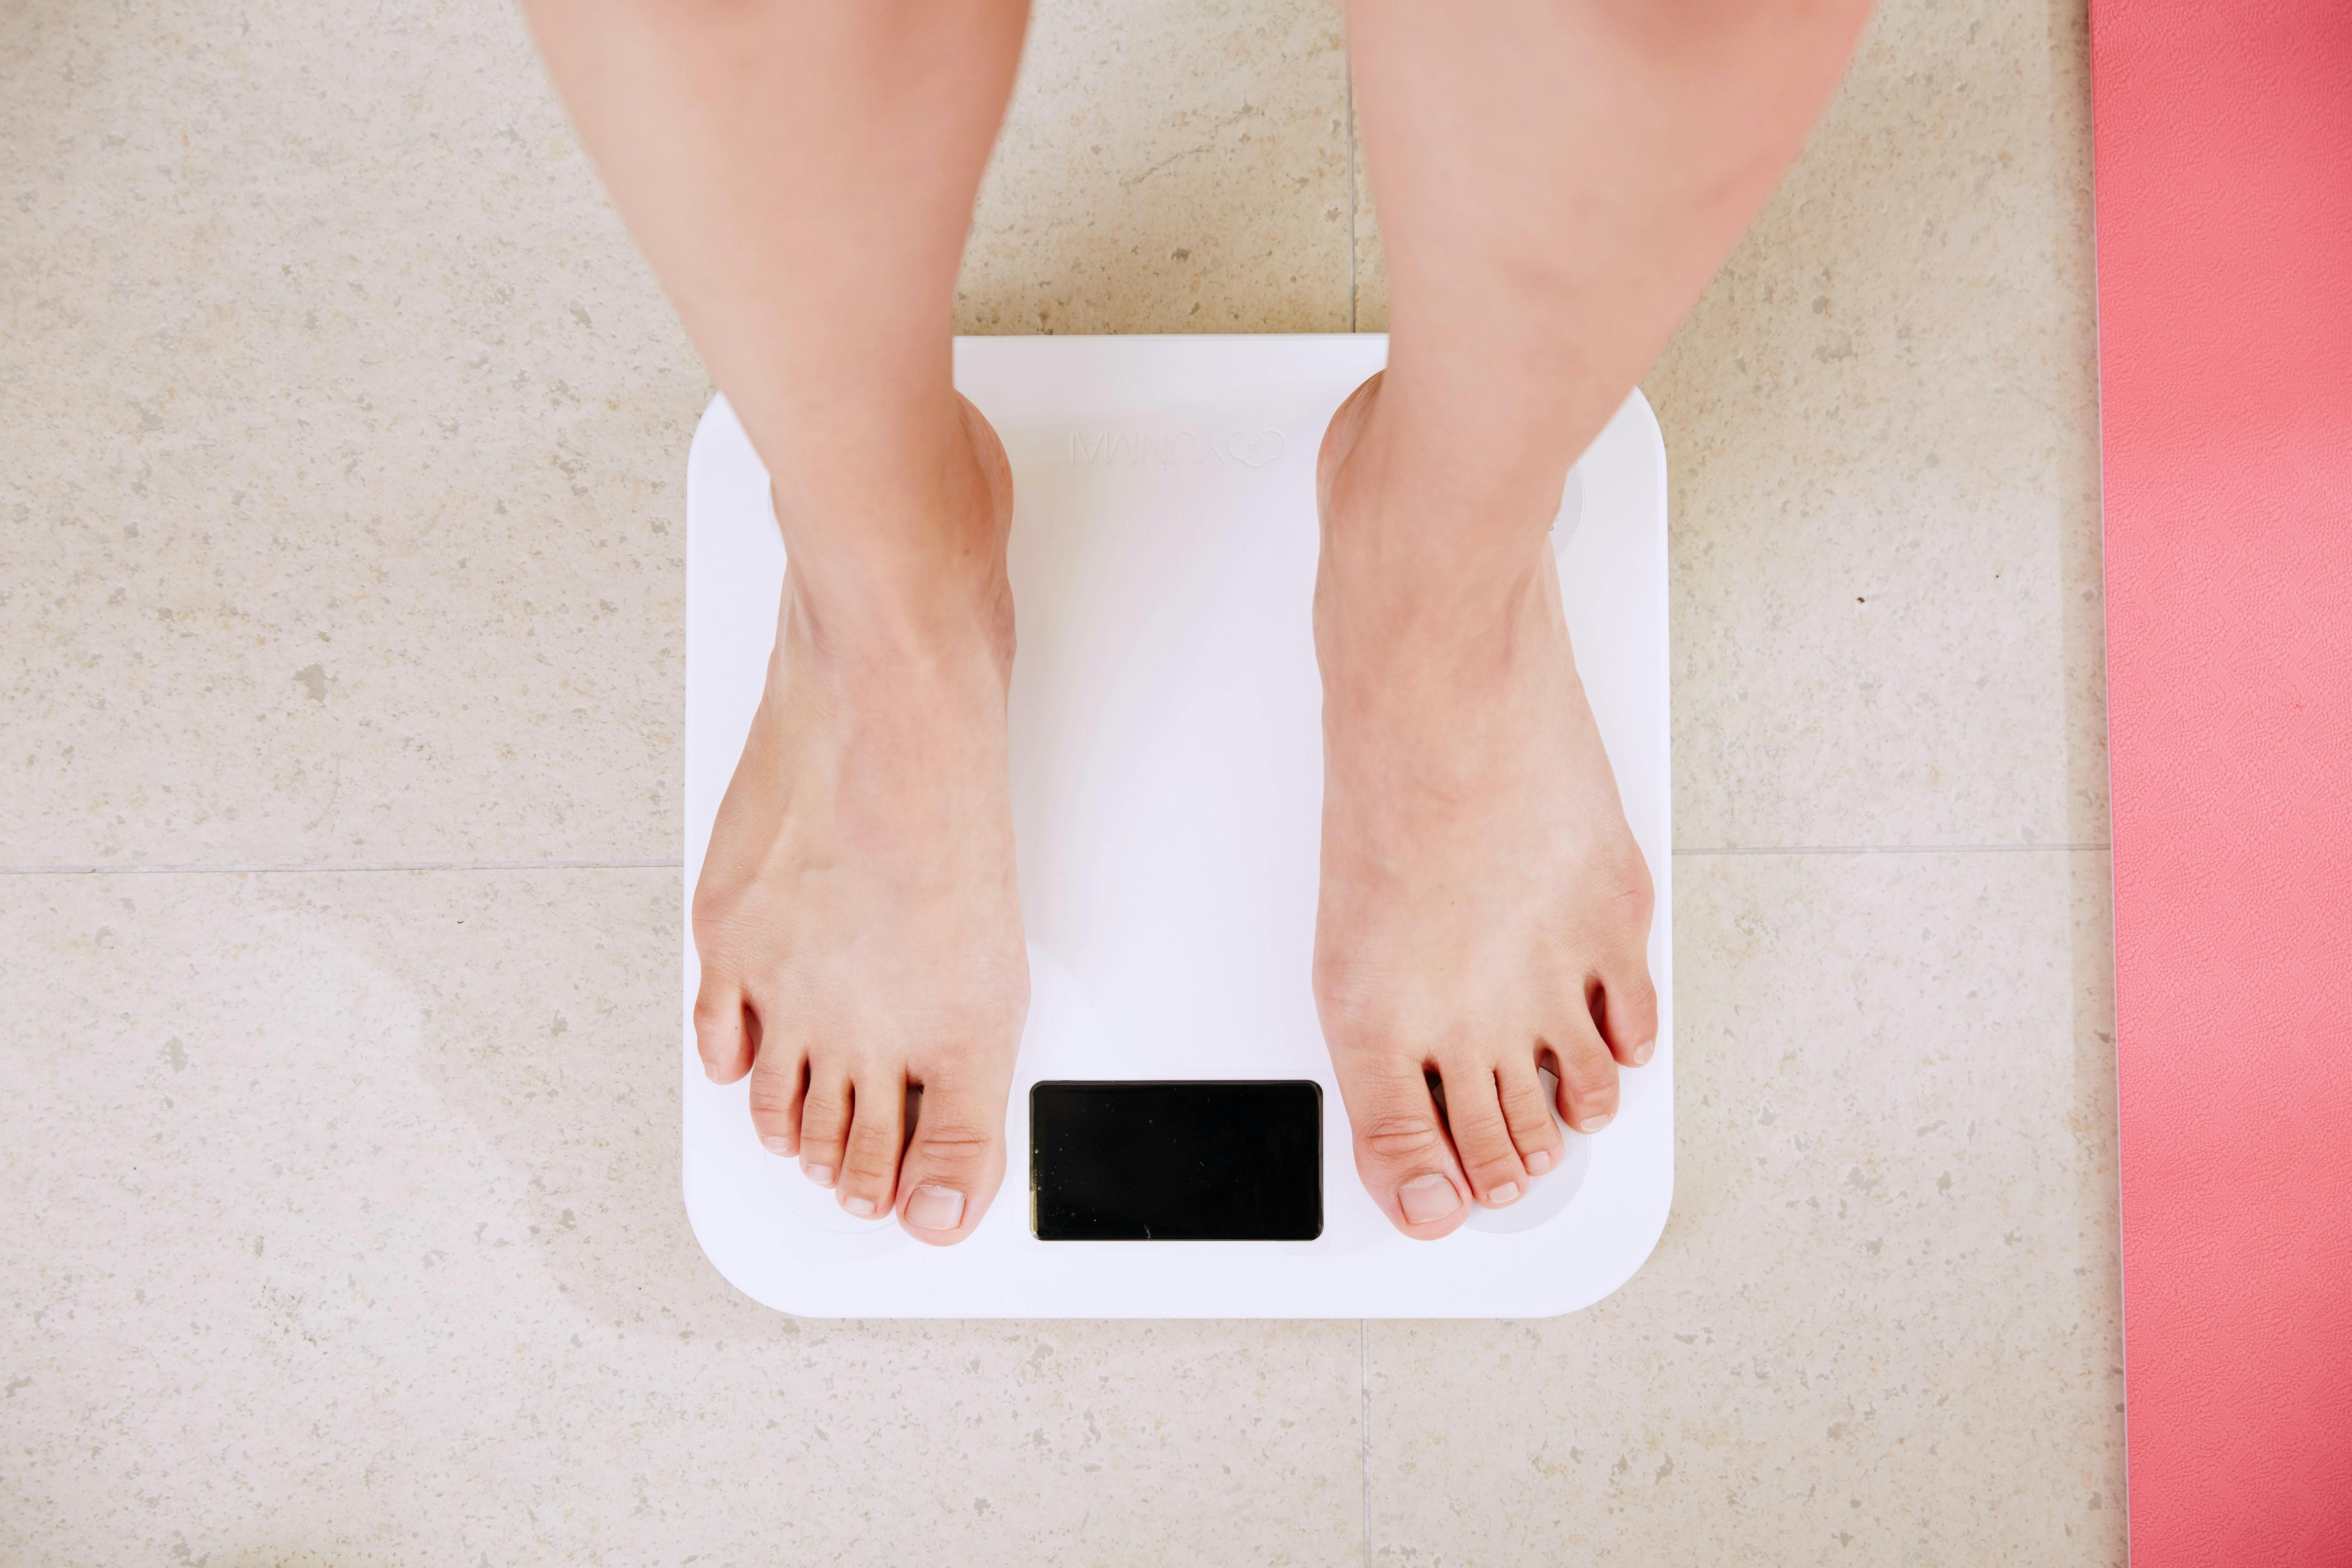 Feet standing on weighing scales